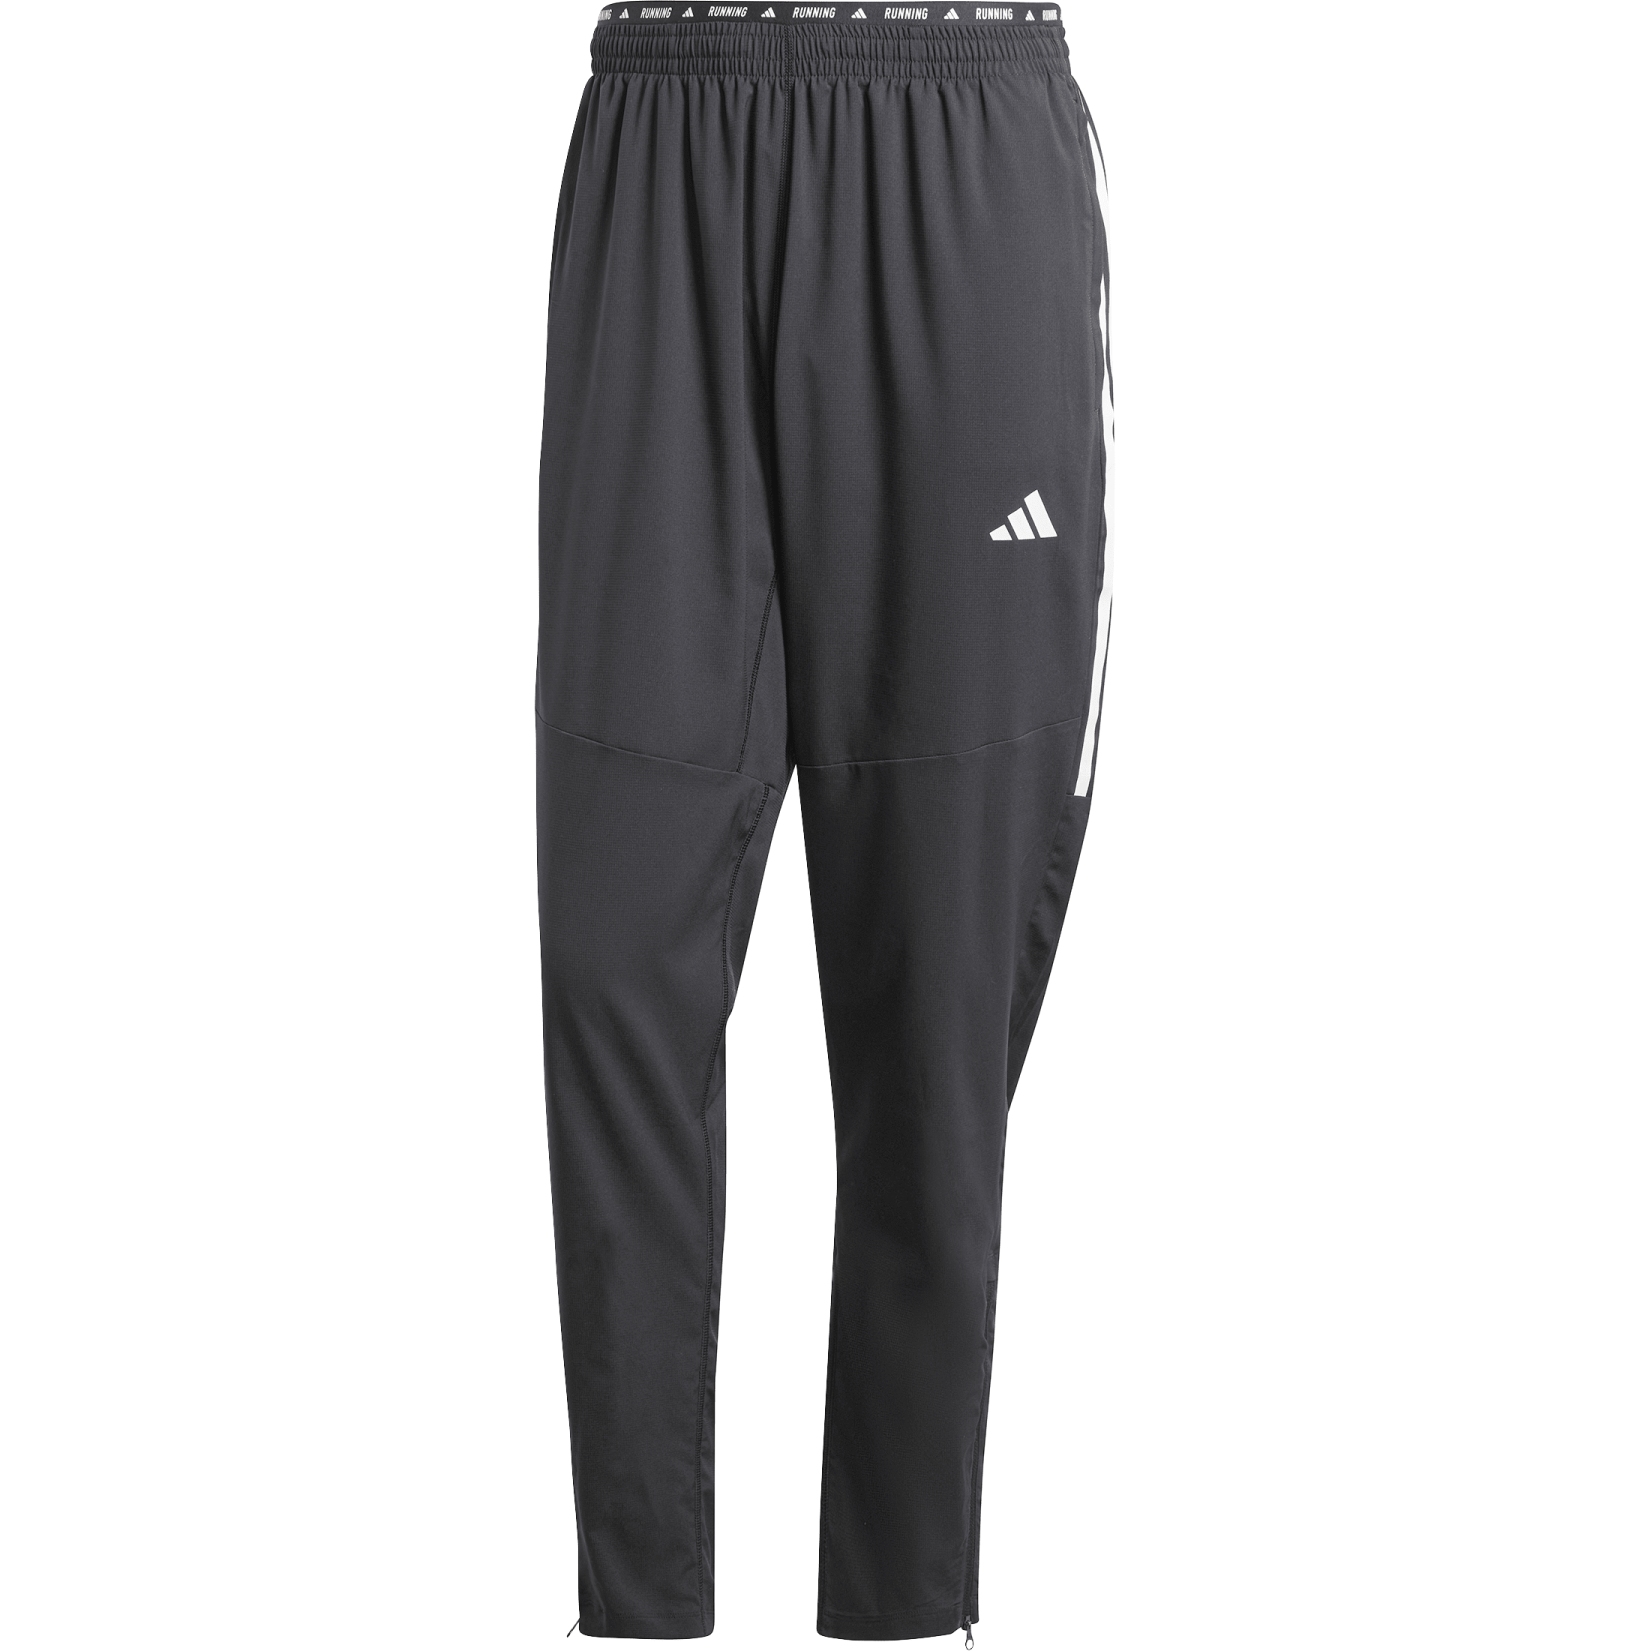 Picture of adidas Own The Run Excite 3-Stripes Joggers Pants Men - black IK4982